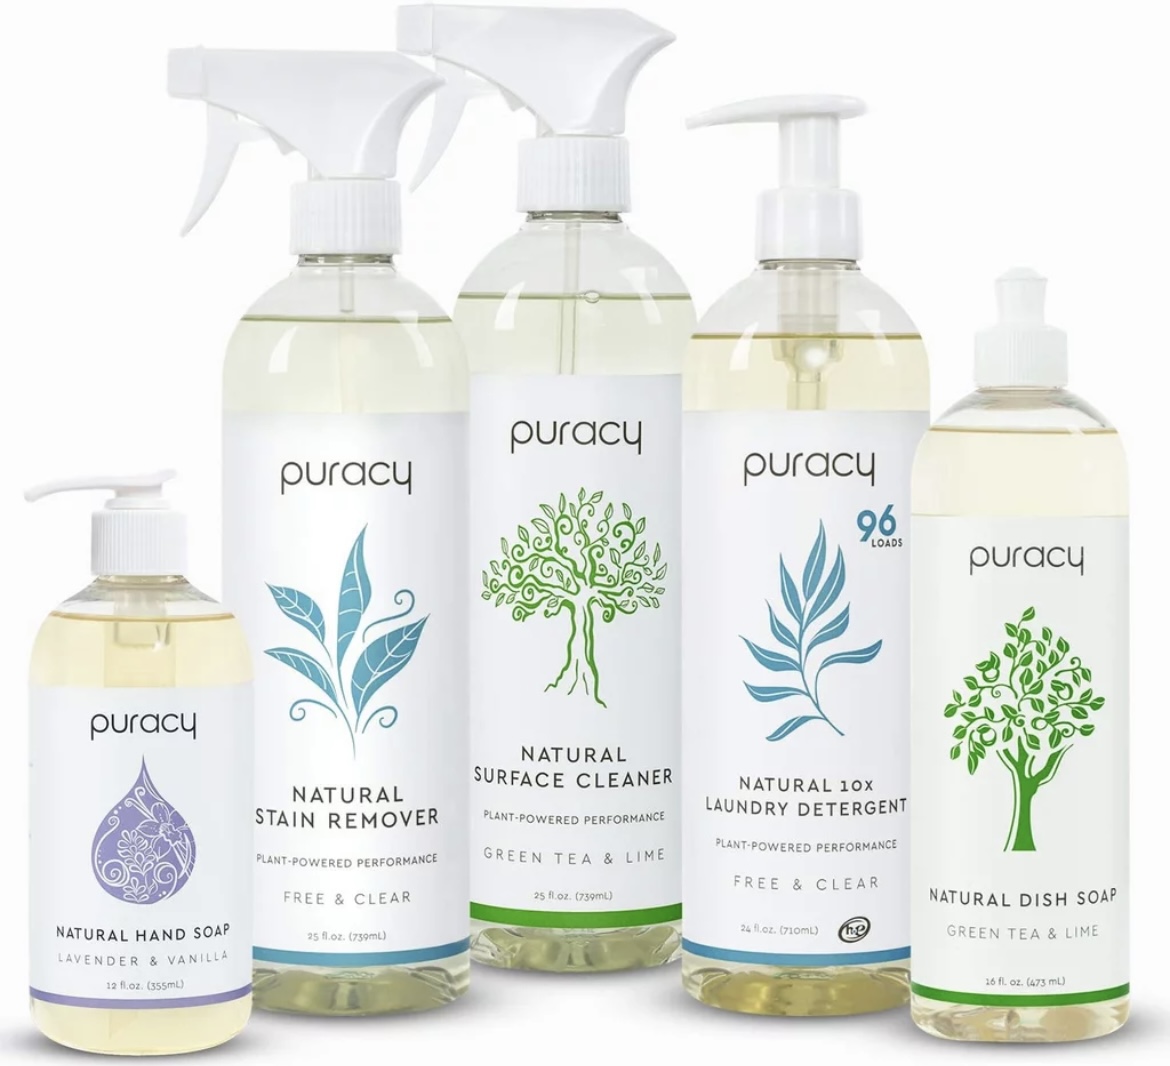 Ditch The Toxins: Home Cleaning Products – Puracy Review